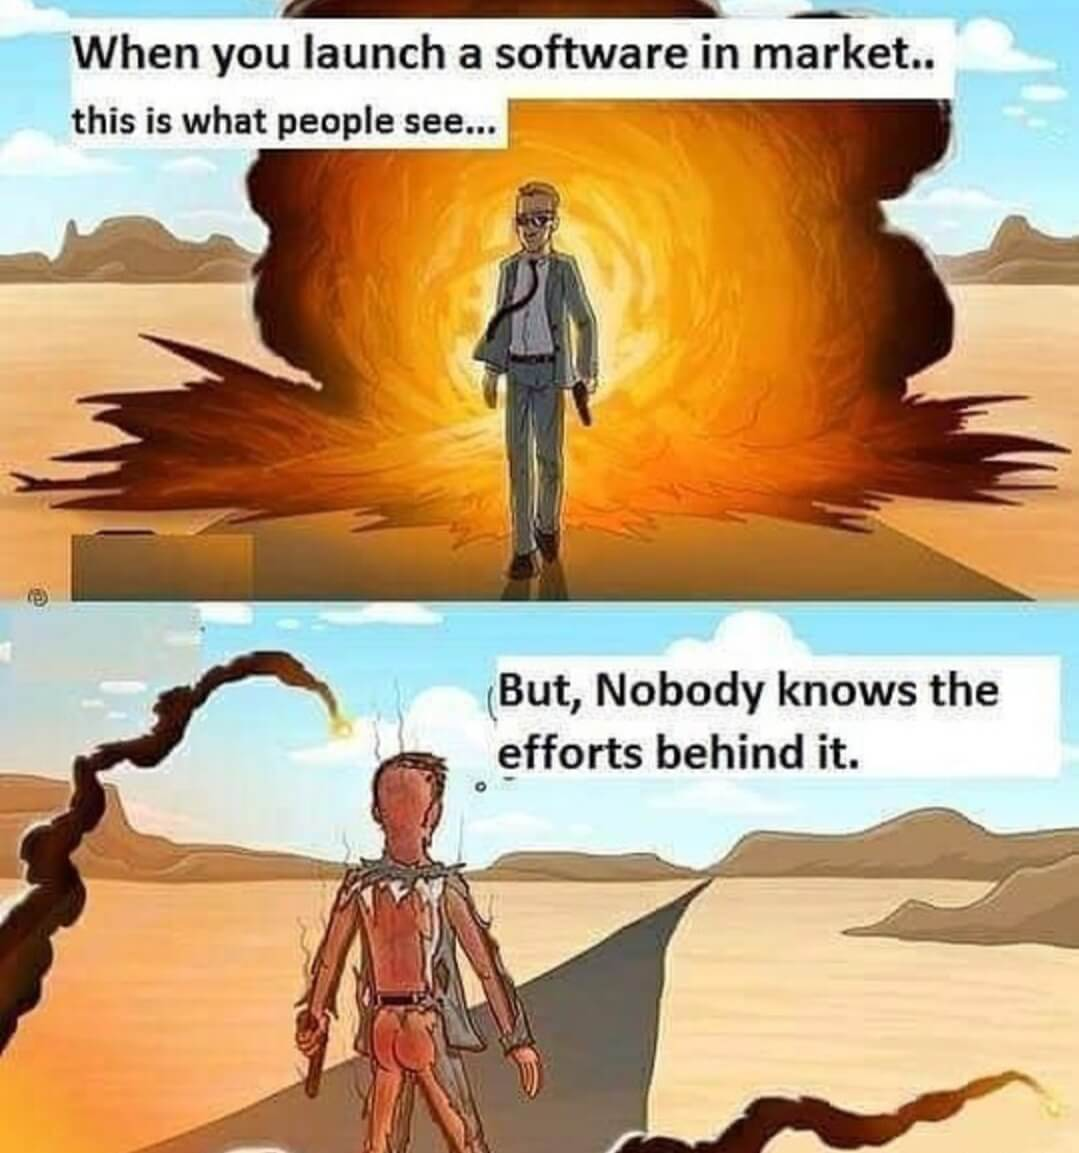 The real story behind every software